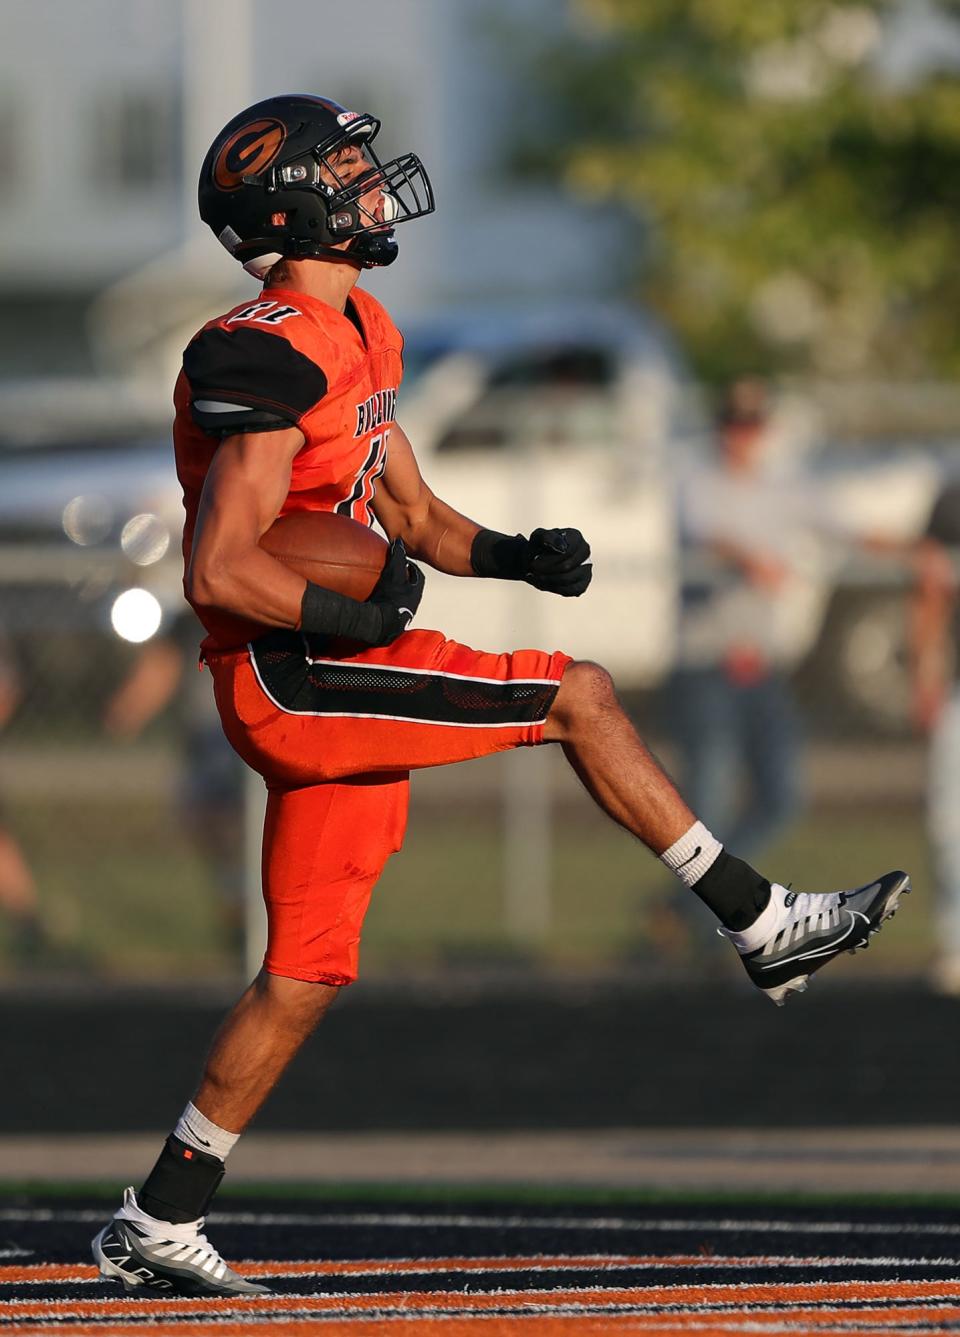 Green defensive back Samino Manson high steps into the end zone for a pick-six touchdown against the Ellet Orangemen during the first half of a high school football game, Friday, Aug. 19, 2022, in Green, Ohio.